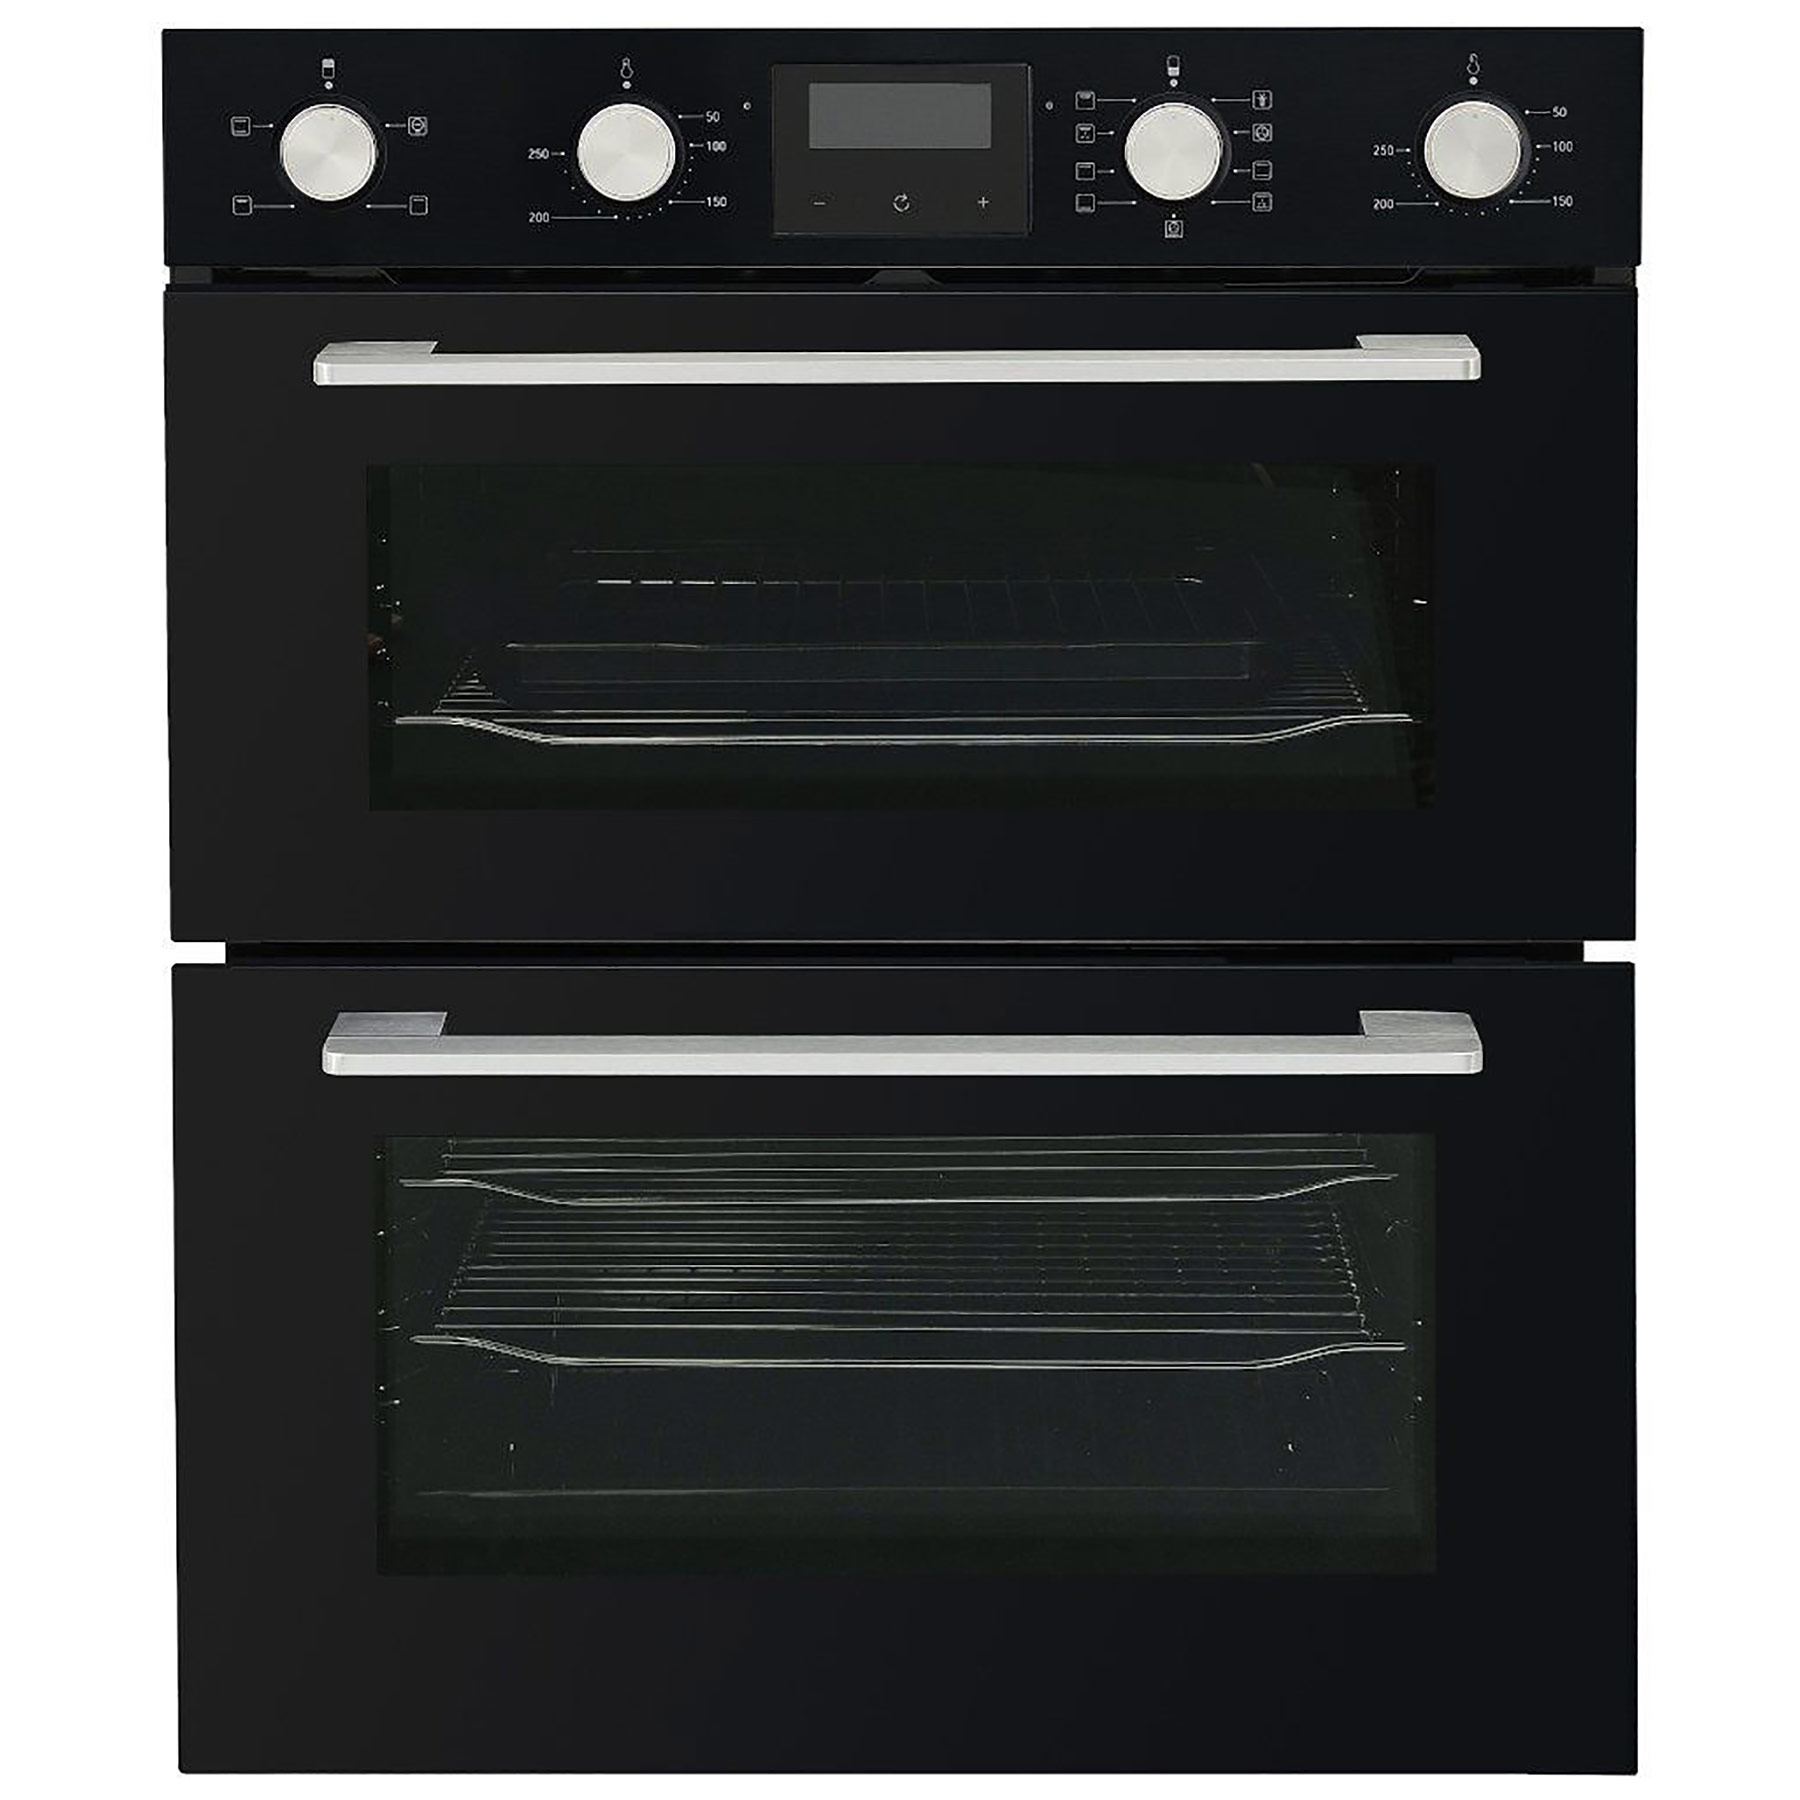 Image of Belling 444411630 70cm Built Under Electric Double Oven Black